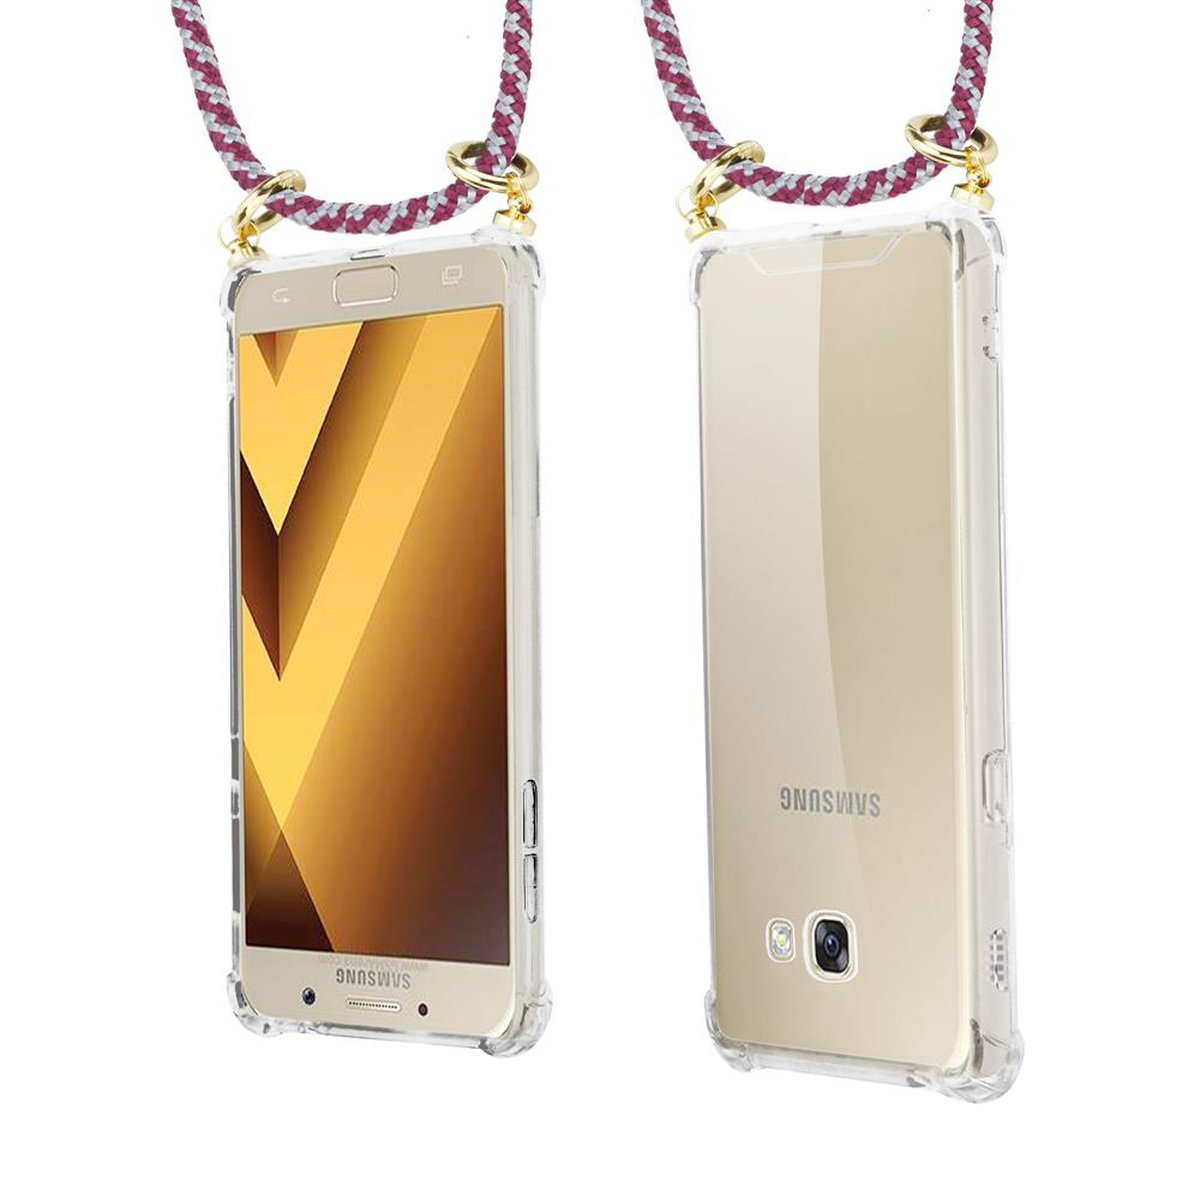 CADORABO Handy Kette mit abnehmbarer Backcover, Band ROT 2017, WEIß Ringen, und A5 Gold Hülle, Kordel Samsung, Galaxy